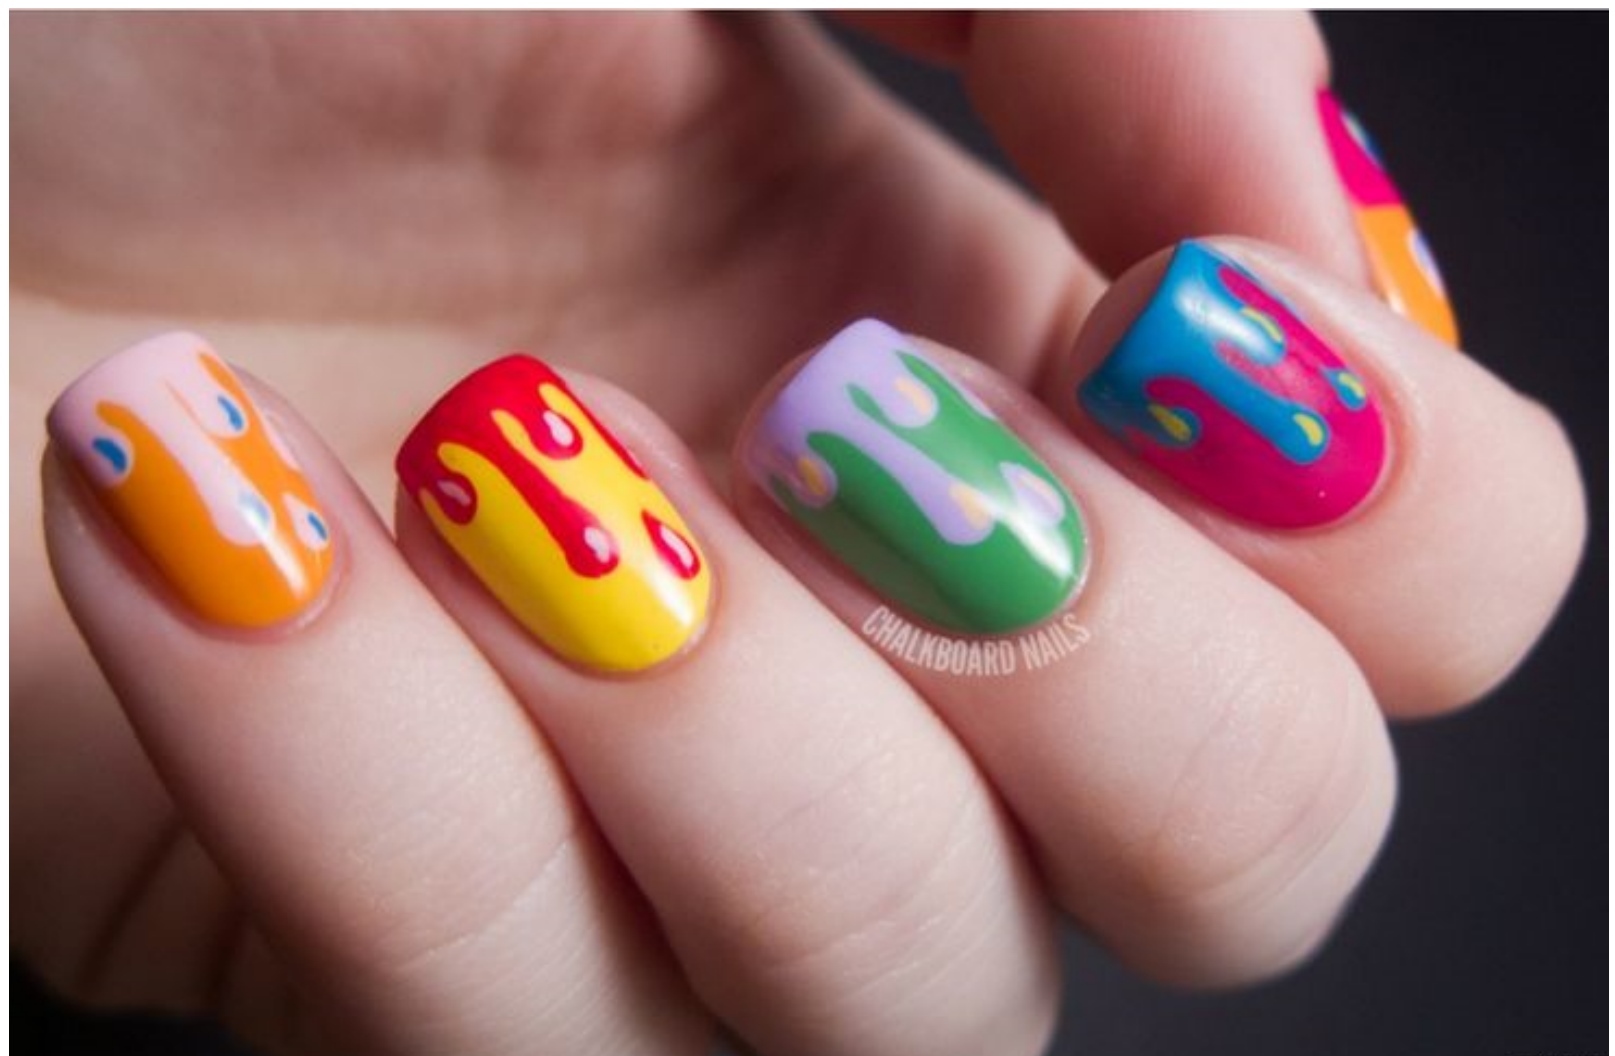 8. Nail Art Designs for Girls Who Love Glitter - wide 4